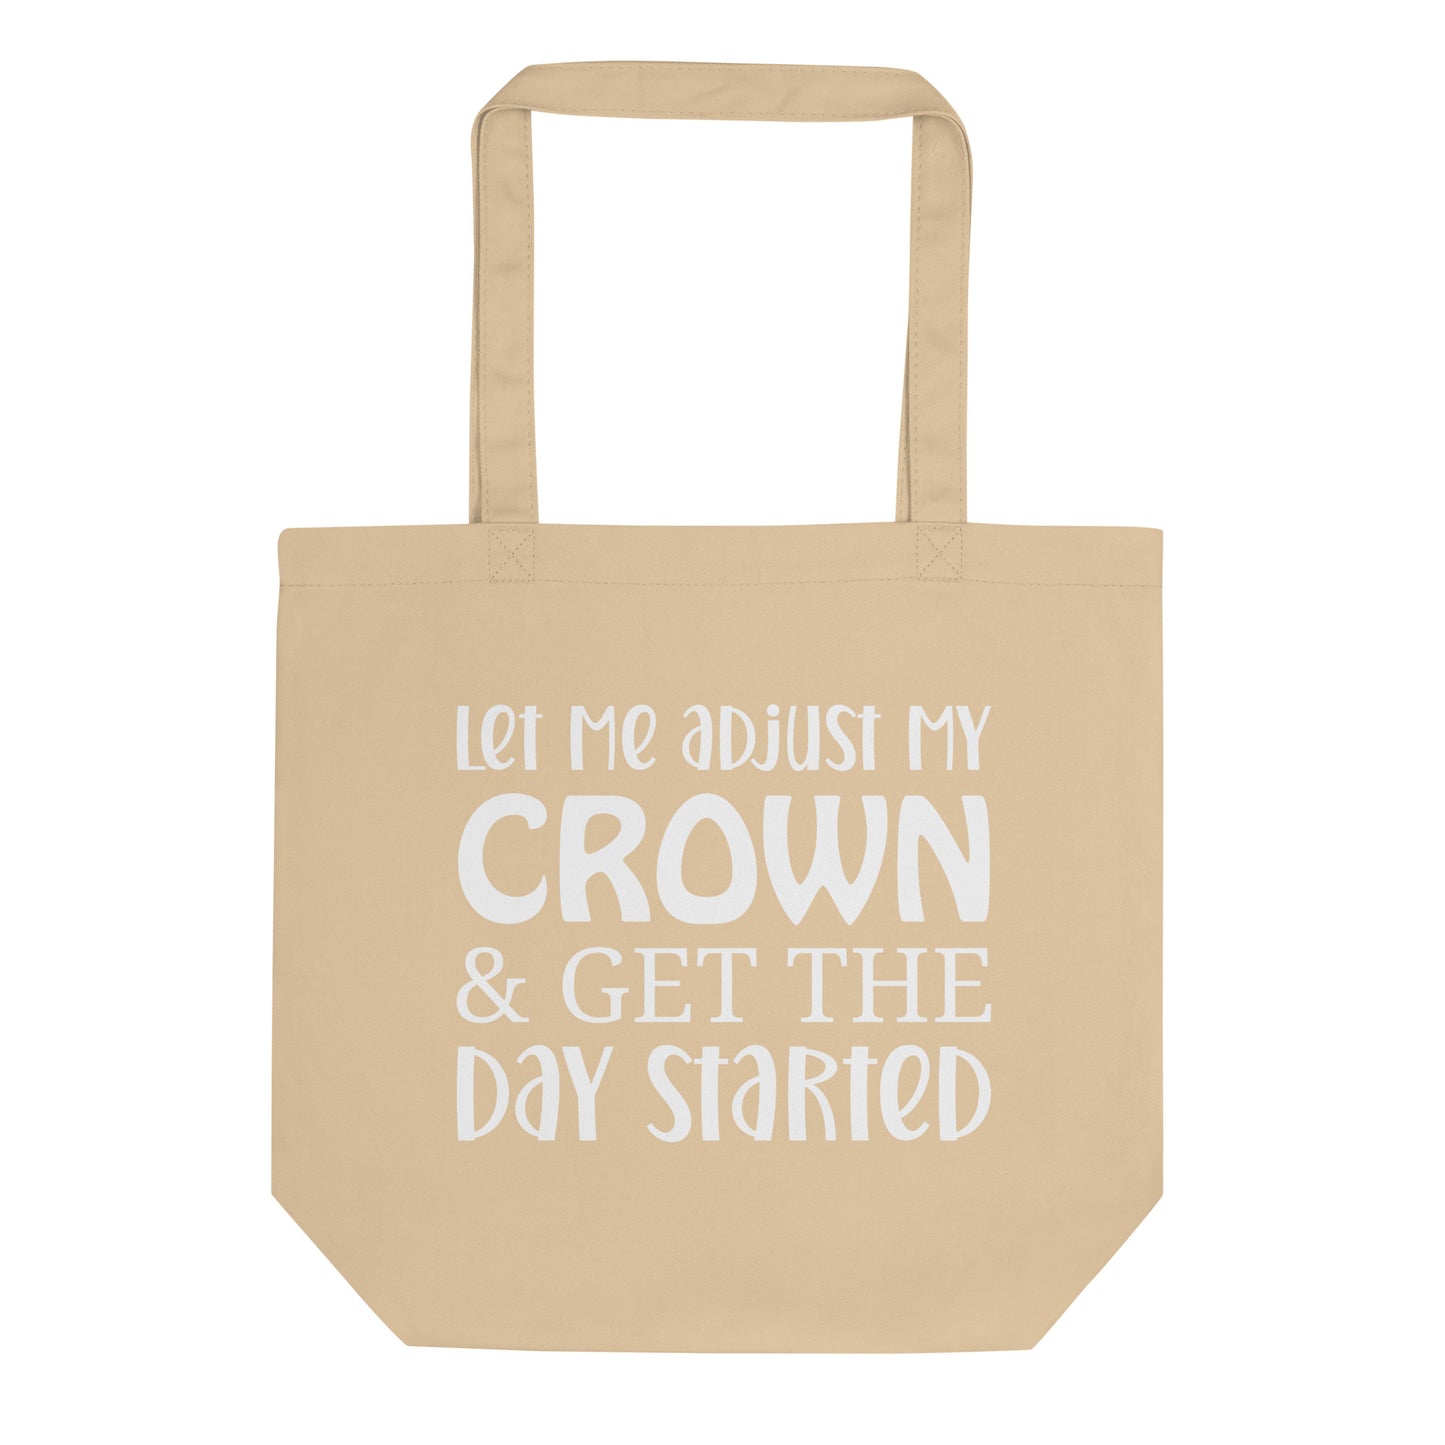 Let Me Adjust My Crown & Get the Day Started Eco Tote Bag